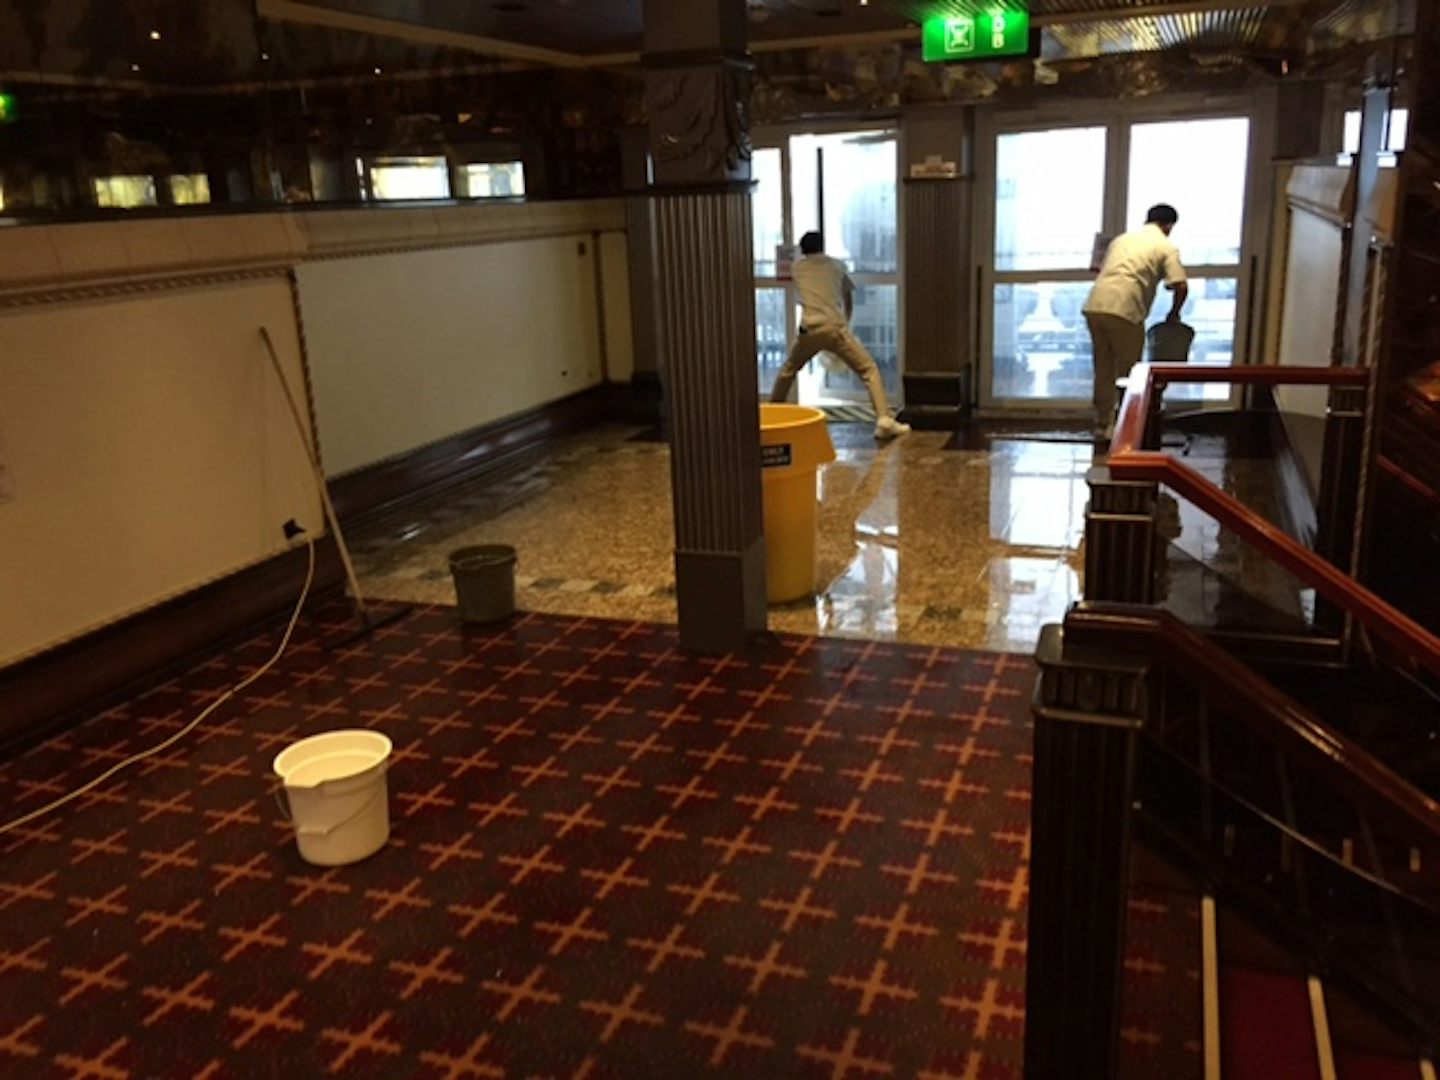 crew cleaning up after waves flooded deck 3 by taj mahal.